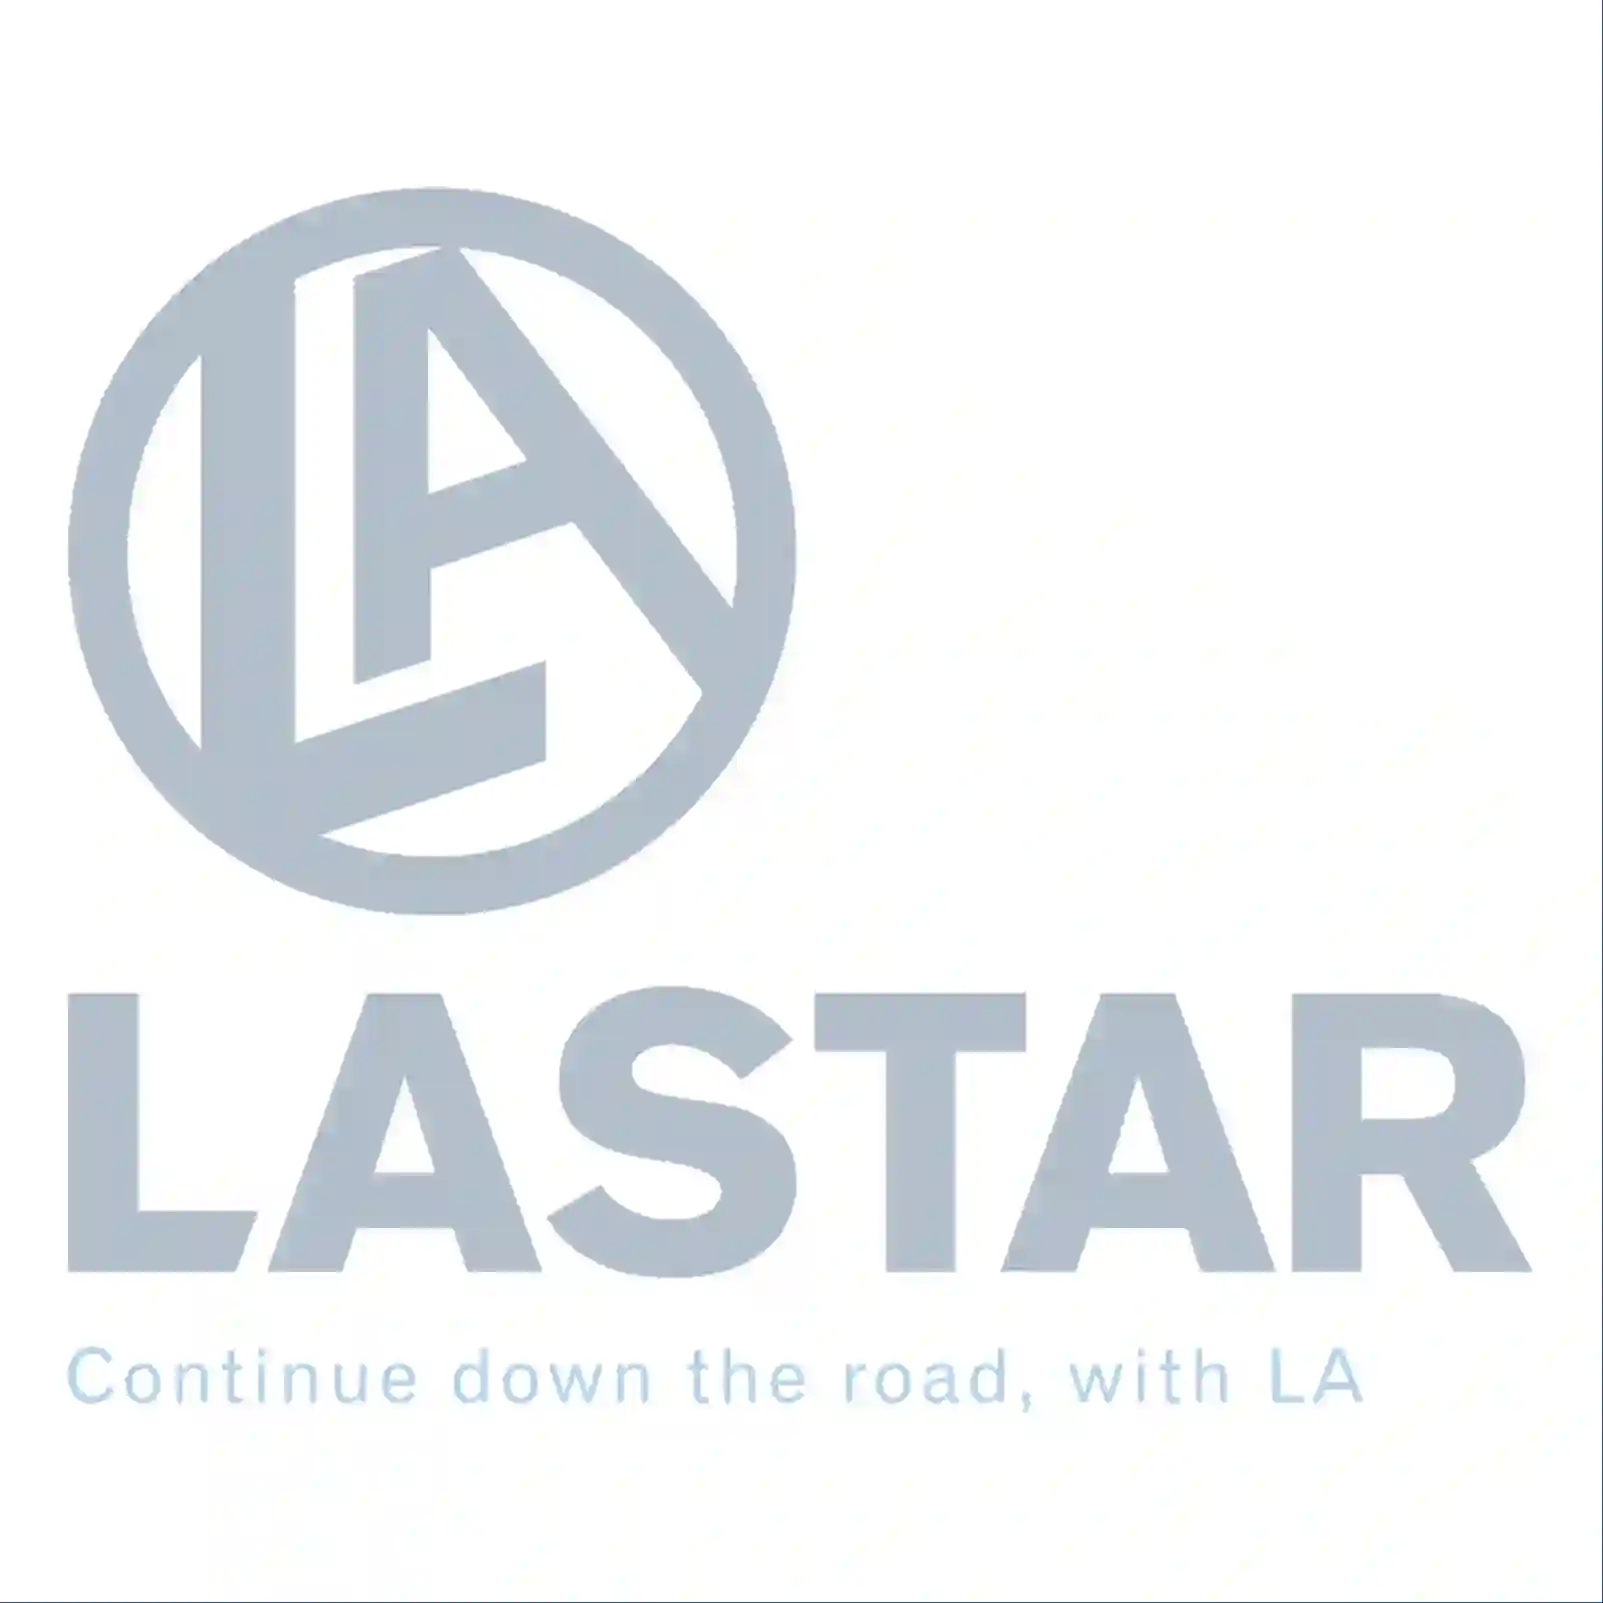  Turn signal lamp, lateral, left, silver || Lastar Spare Part | Truck Spare Parts, Auotomotive Spare Parts